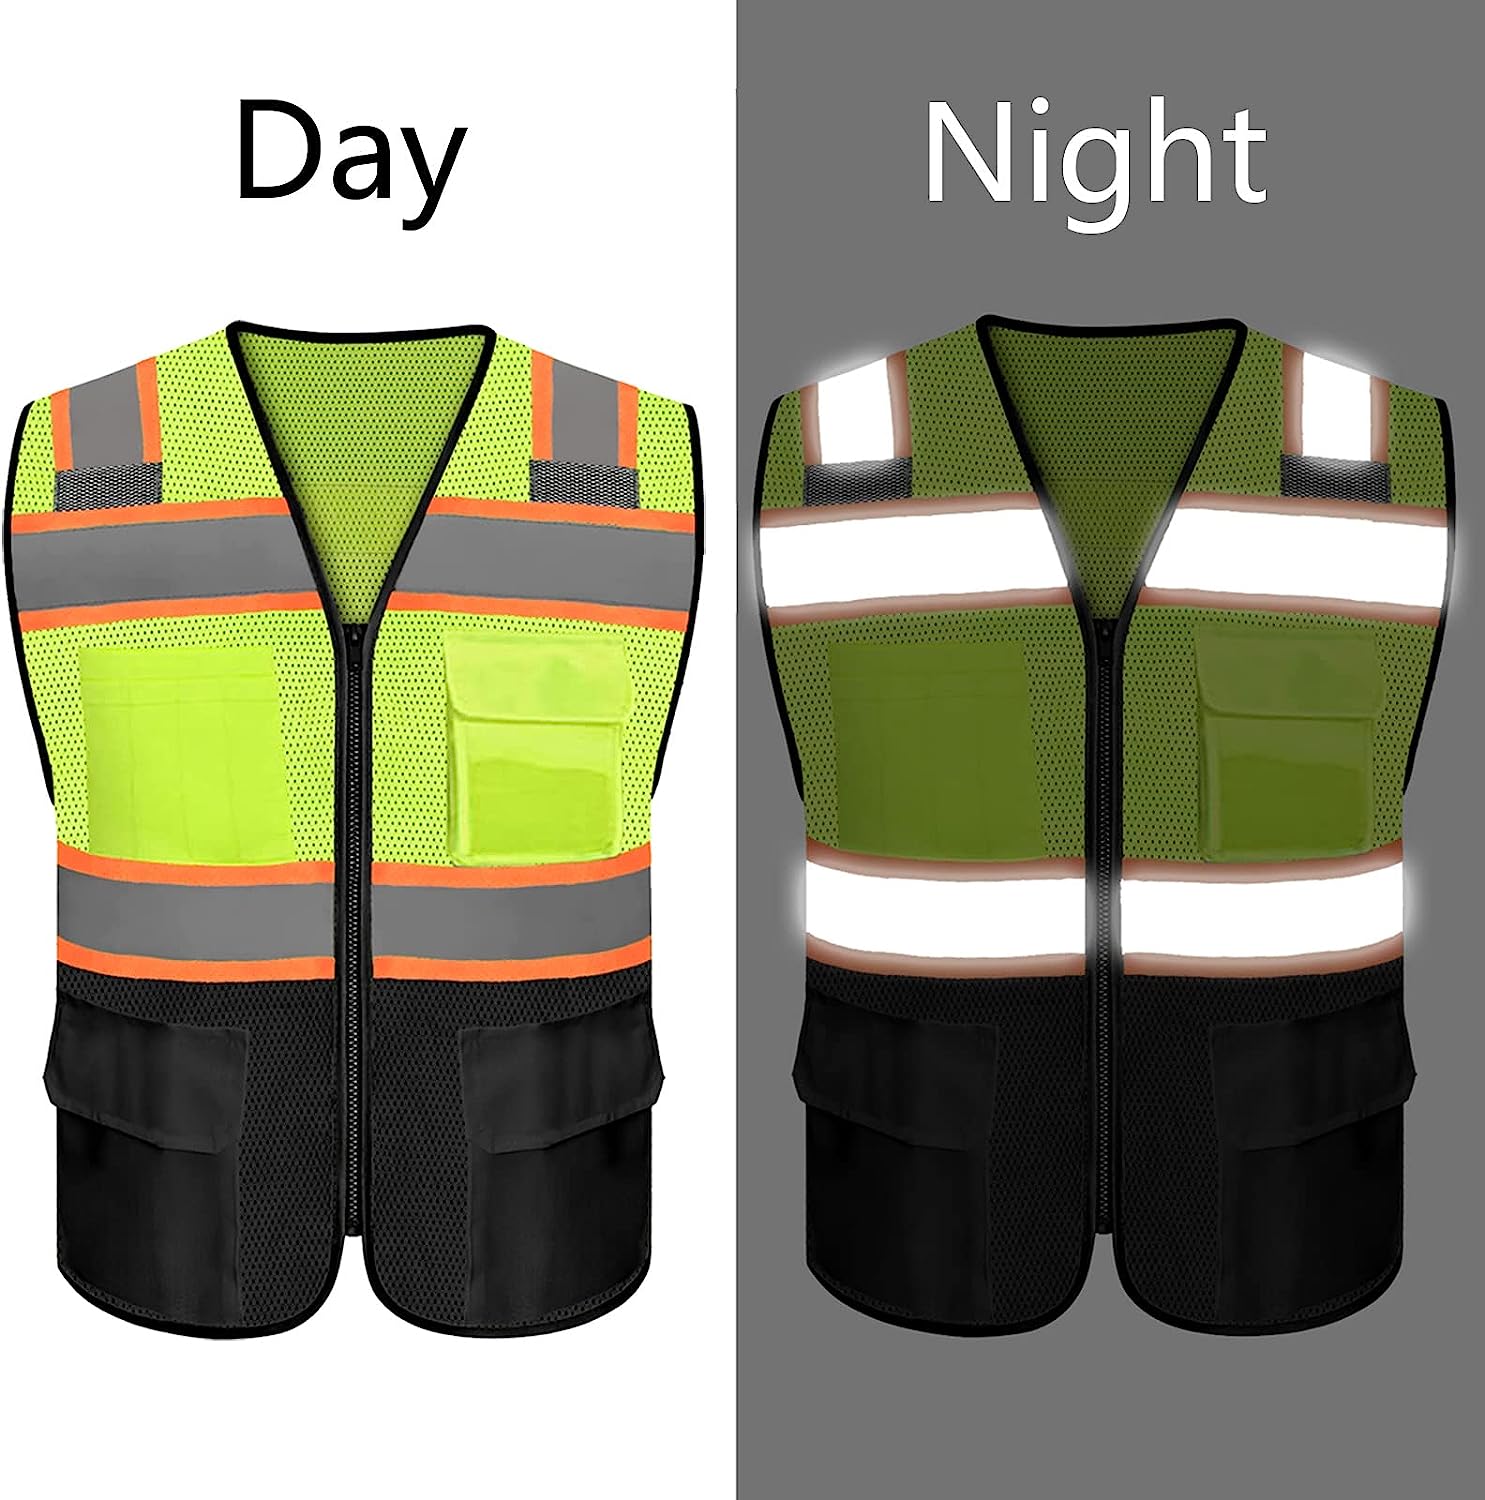 Free custom safety vest hi vis reflective vest mesh with company logo pockets zipper personalized printed Customize construction traffic security work vest class 2 yellow safety vest